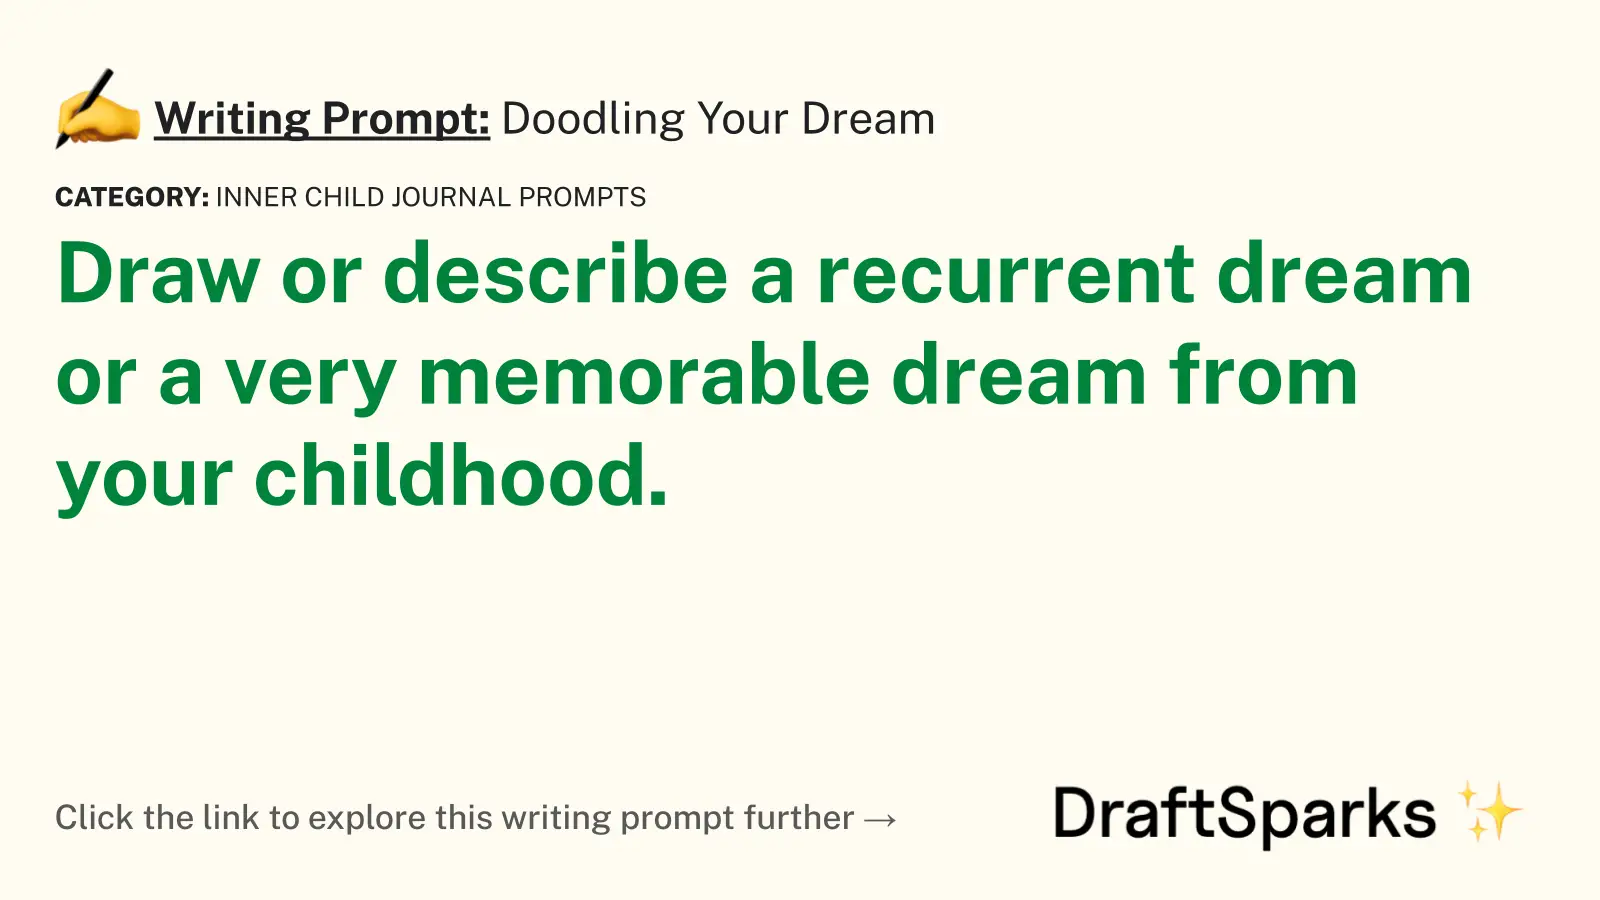 Doodling Your Dream